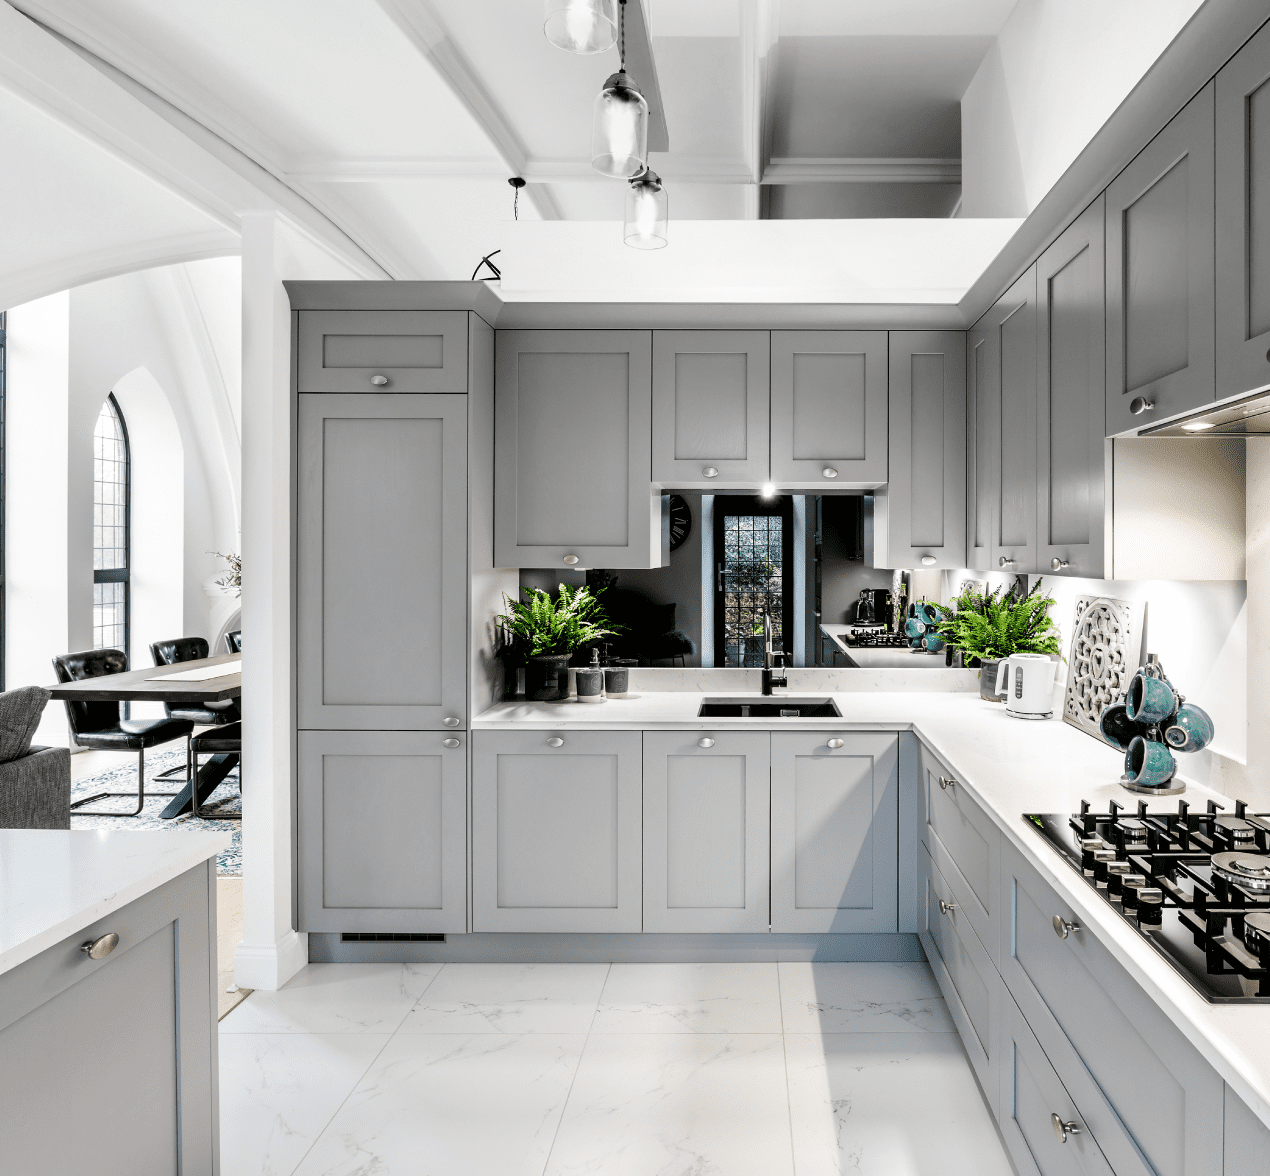 A classic shaker kitchen for a penthouse apartment